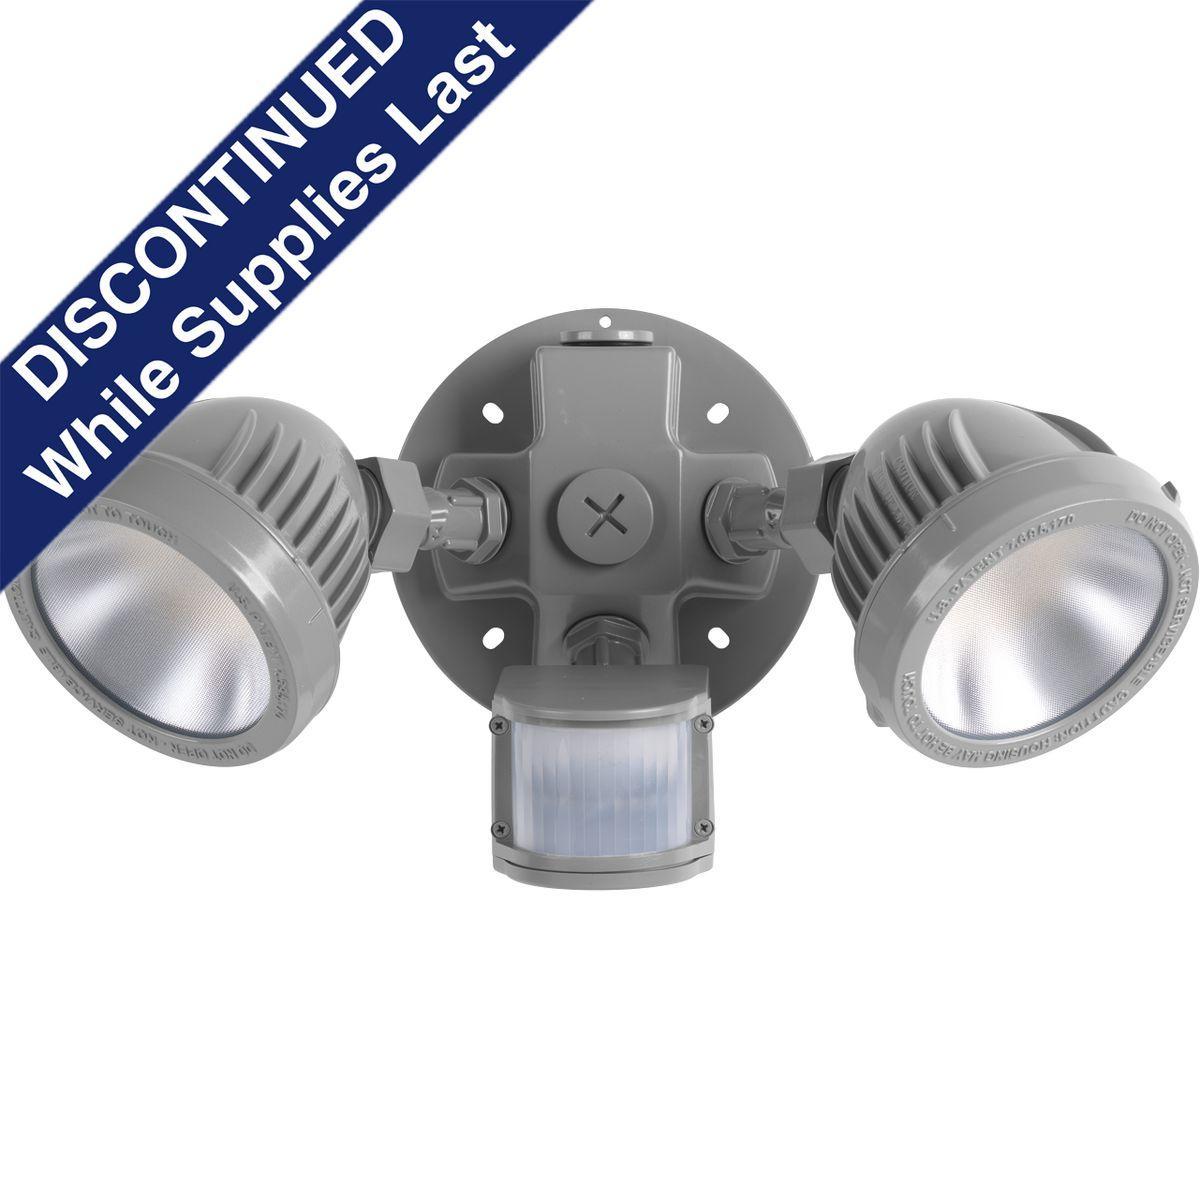 Hubbell P6341-82-30K The two-light Security light with motion sensor is ideal for residential and commercial applications. Each tempered glass head has over 1,000 lumens and is adjustable. The motion sensor has 180 degree coverage, center focus range to 72 feet, Time On, Sens